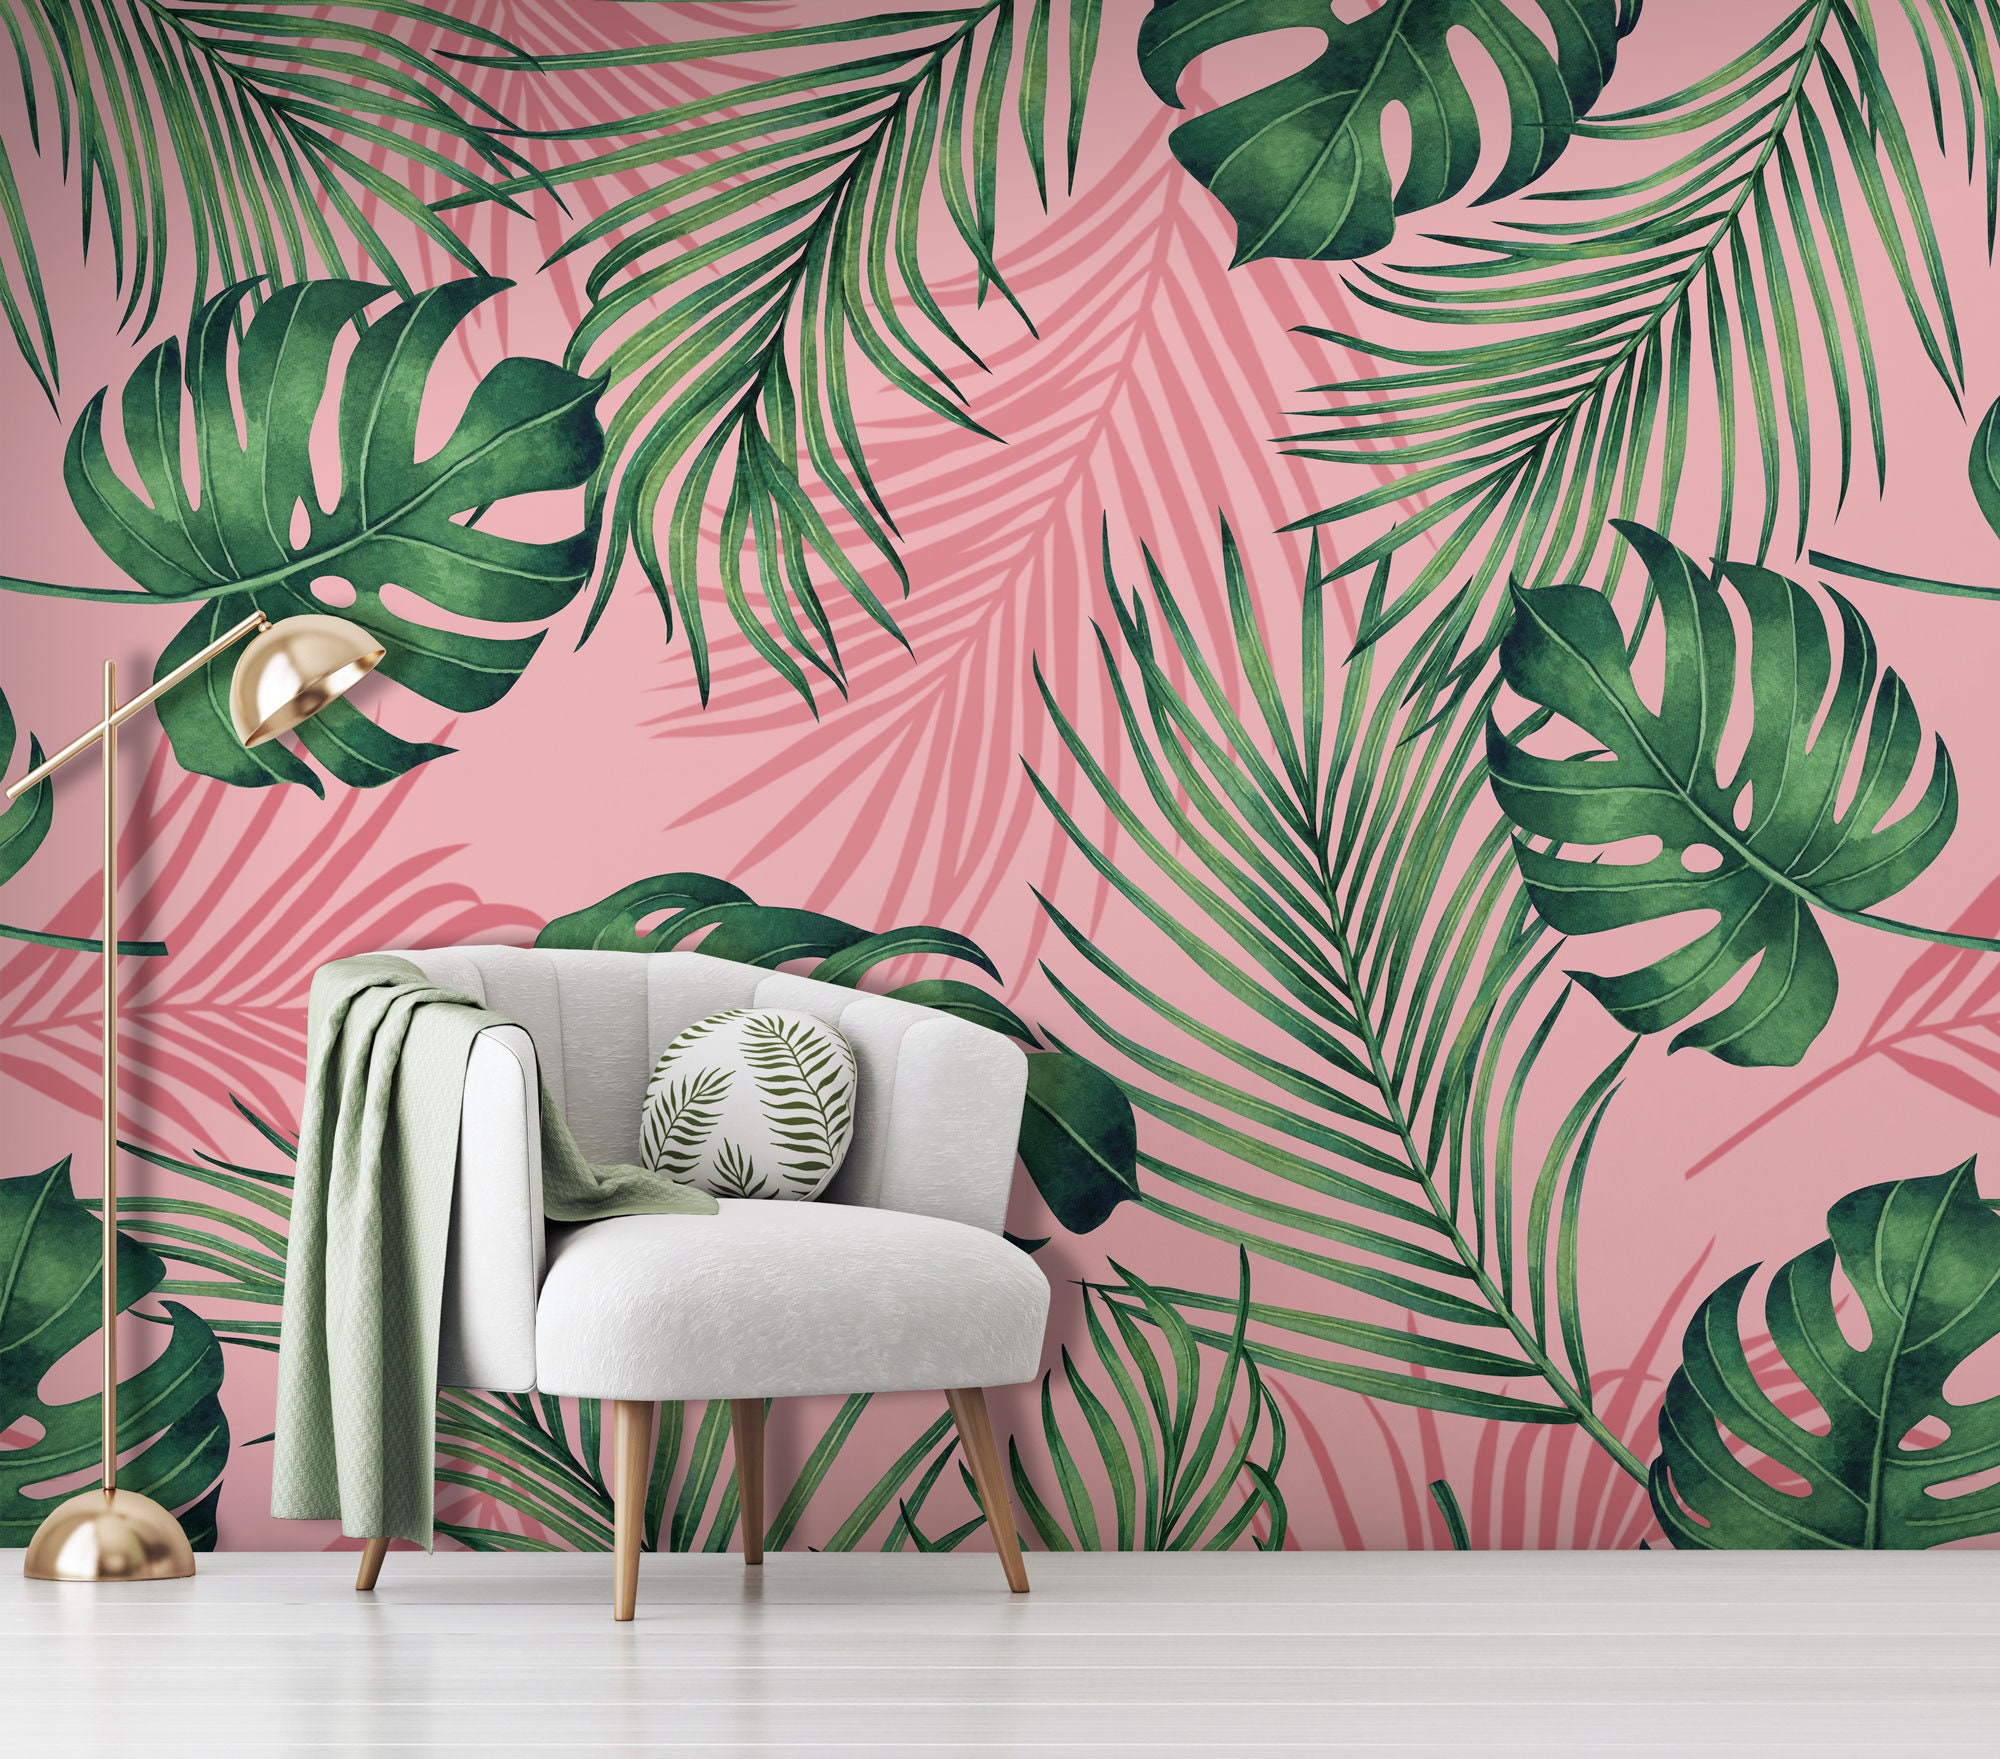 Green Abstract Tropical Leaf Wallpaper Mural  Hovia